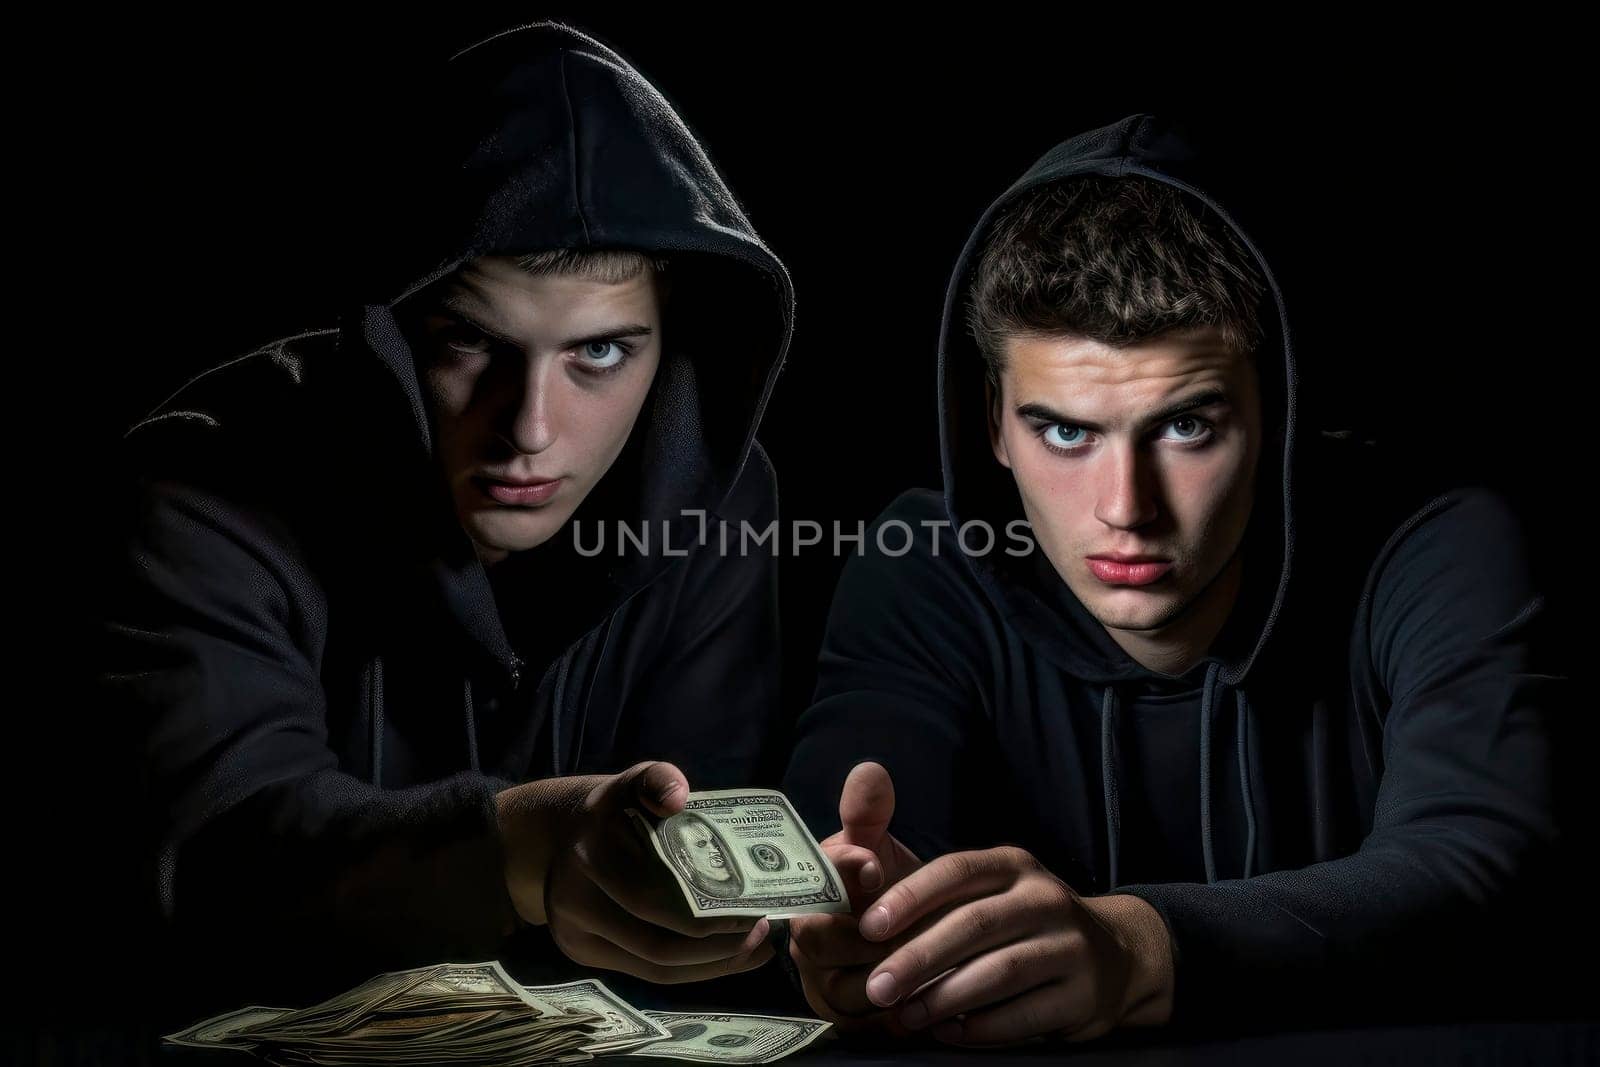 Youthful Thieves with Cash Loot in Hand by pippocarlot